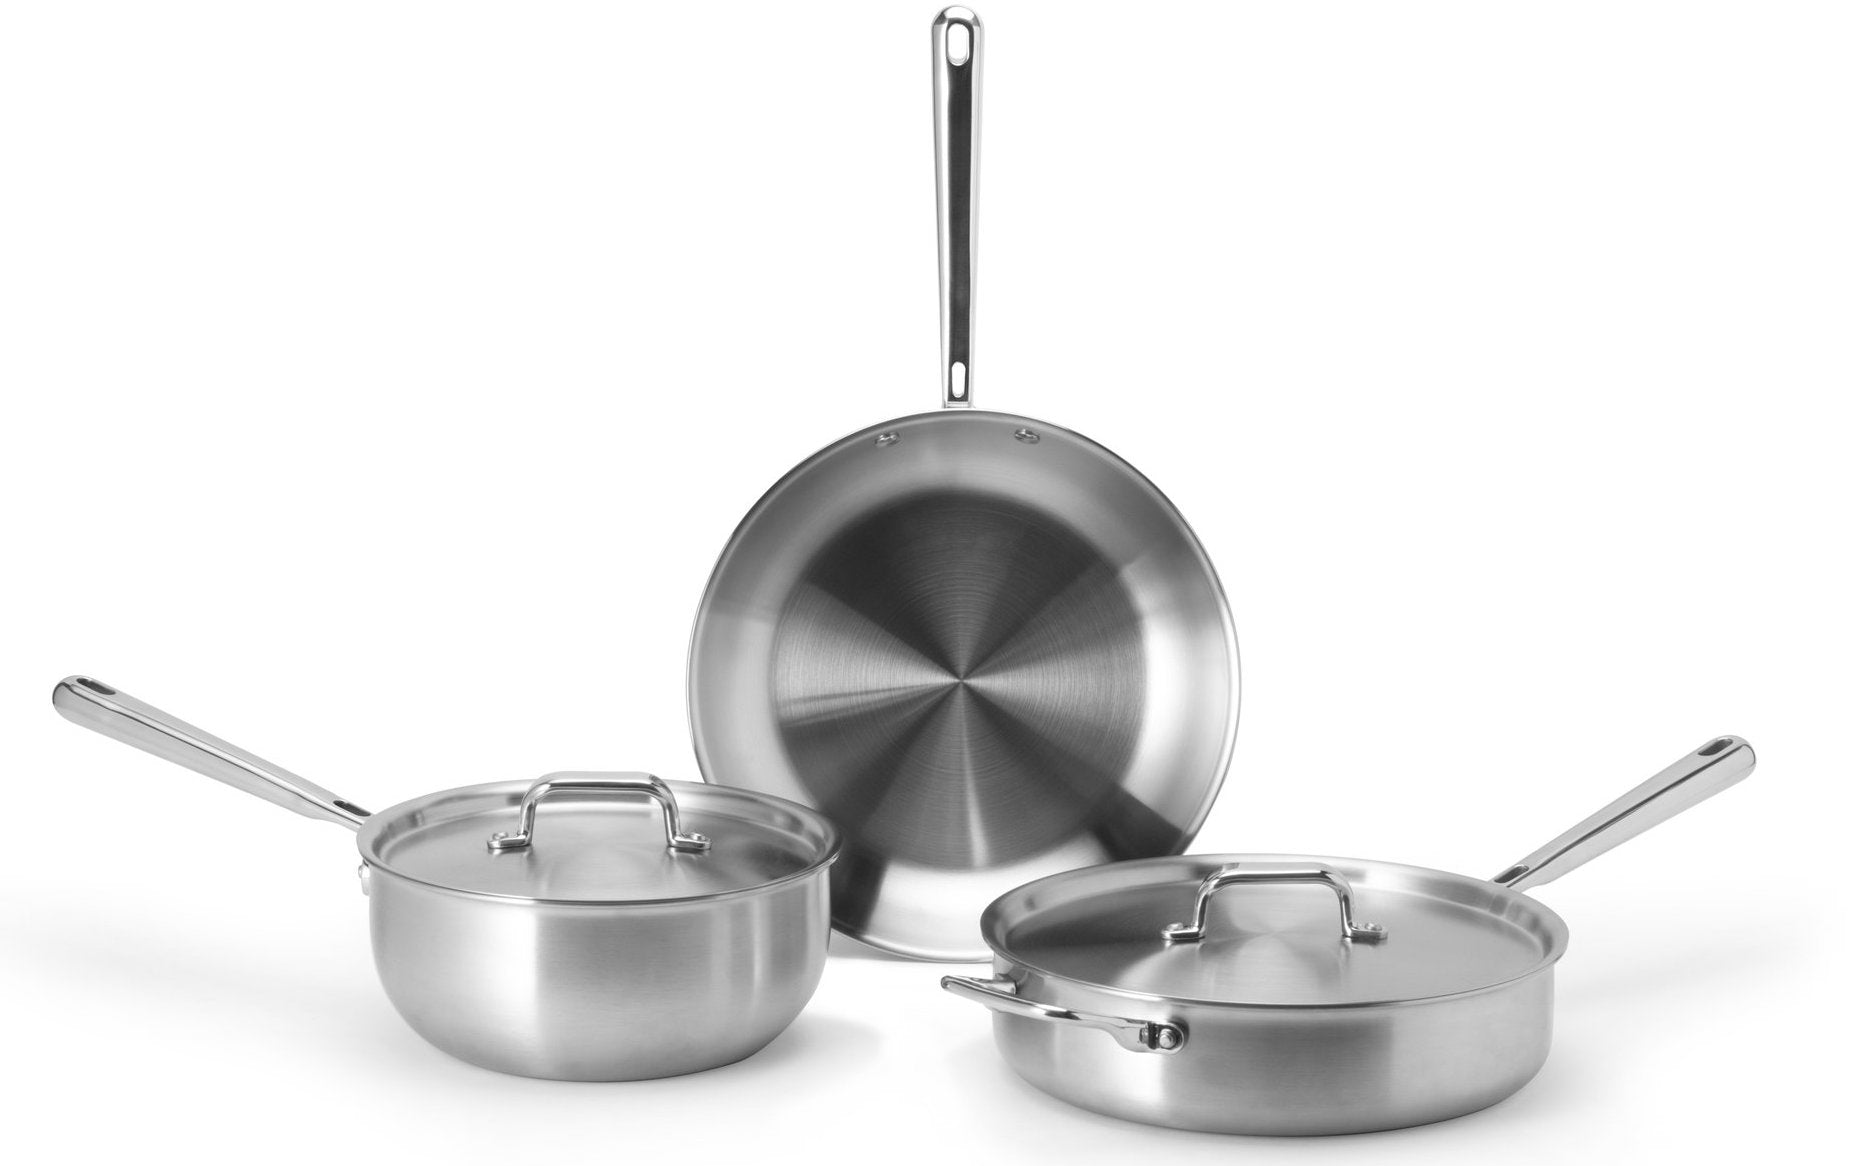 The Misen starter cookware set with an oven-safe skillet